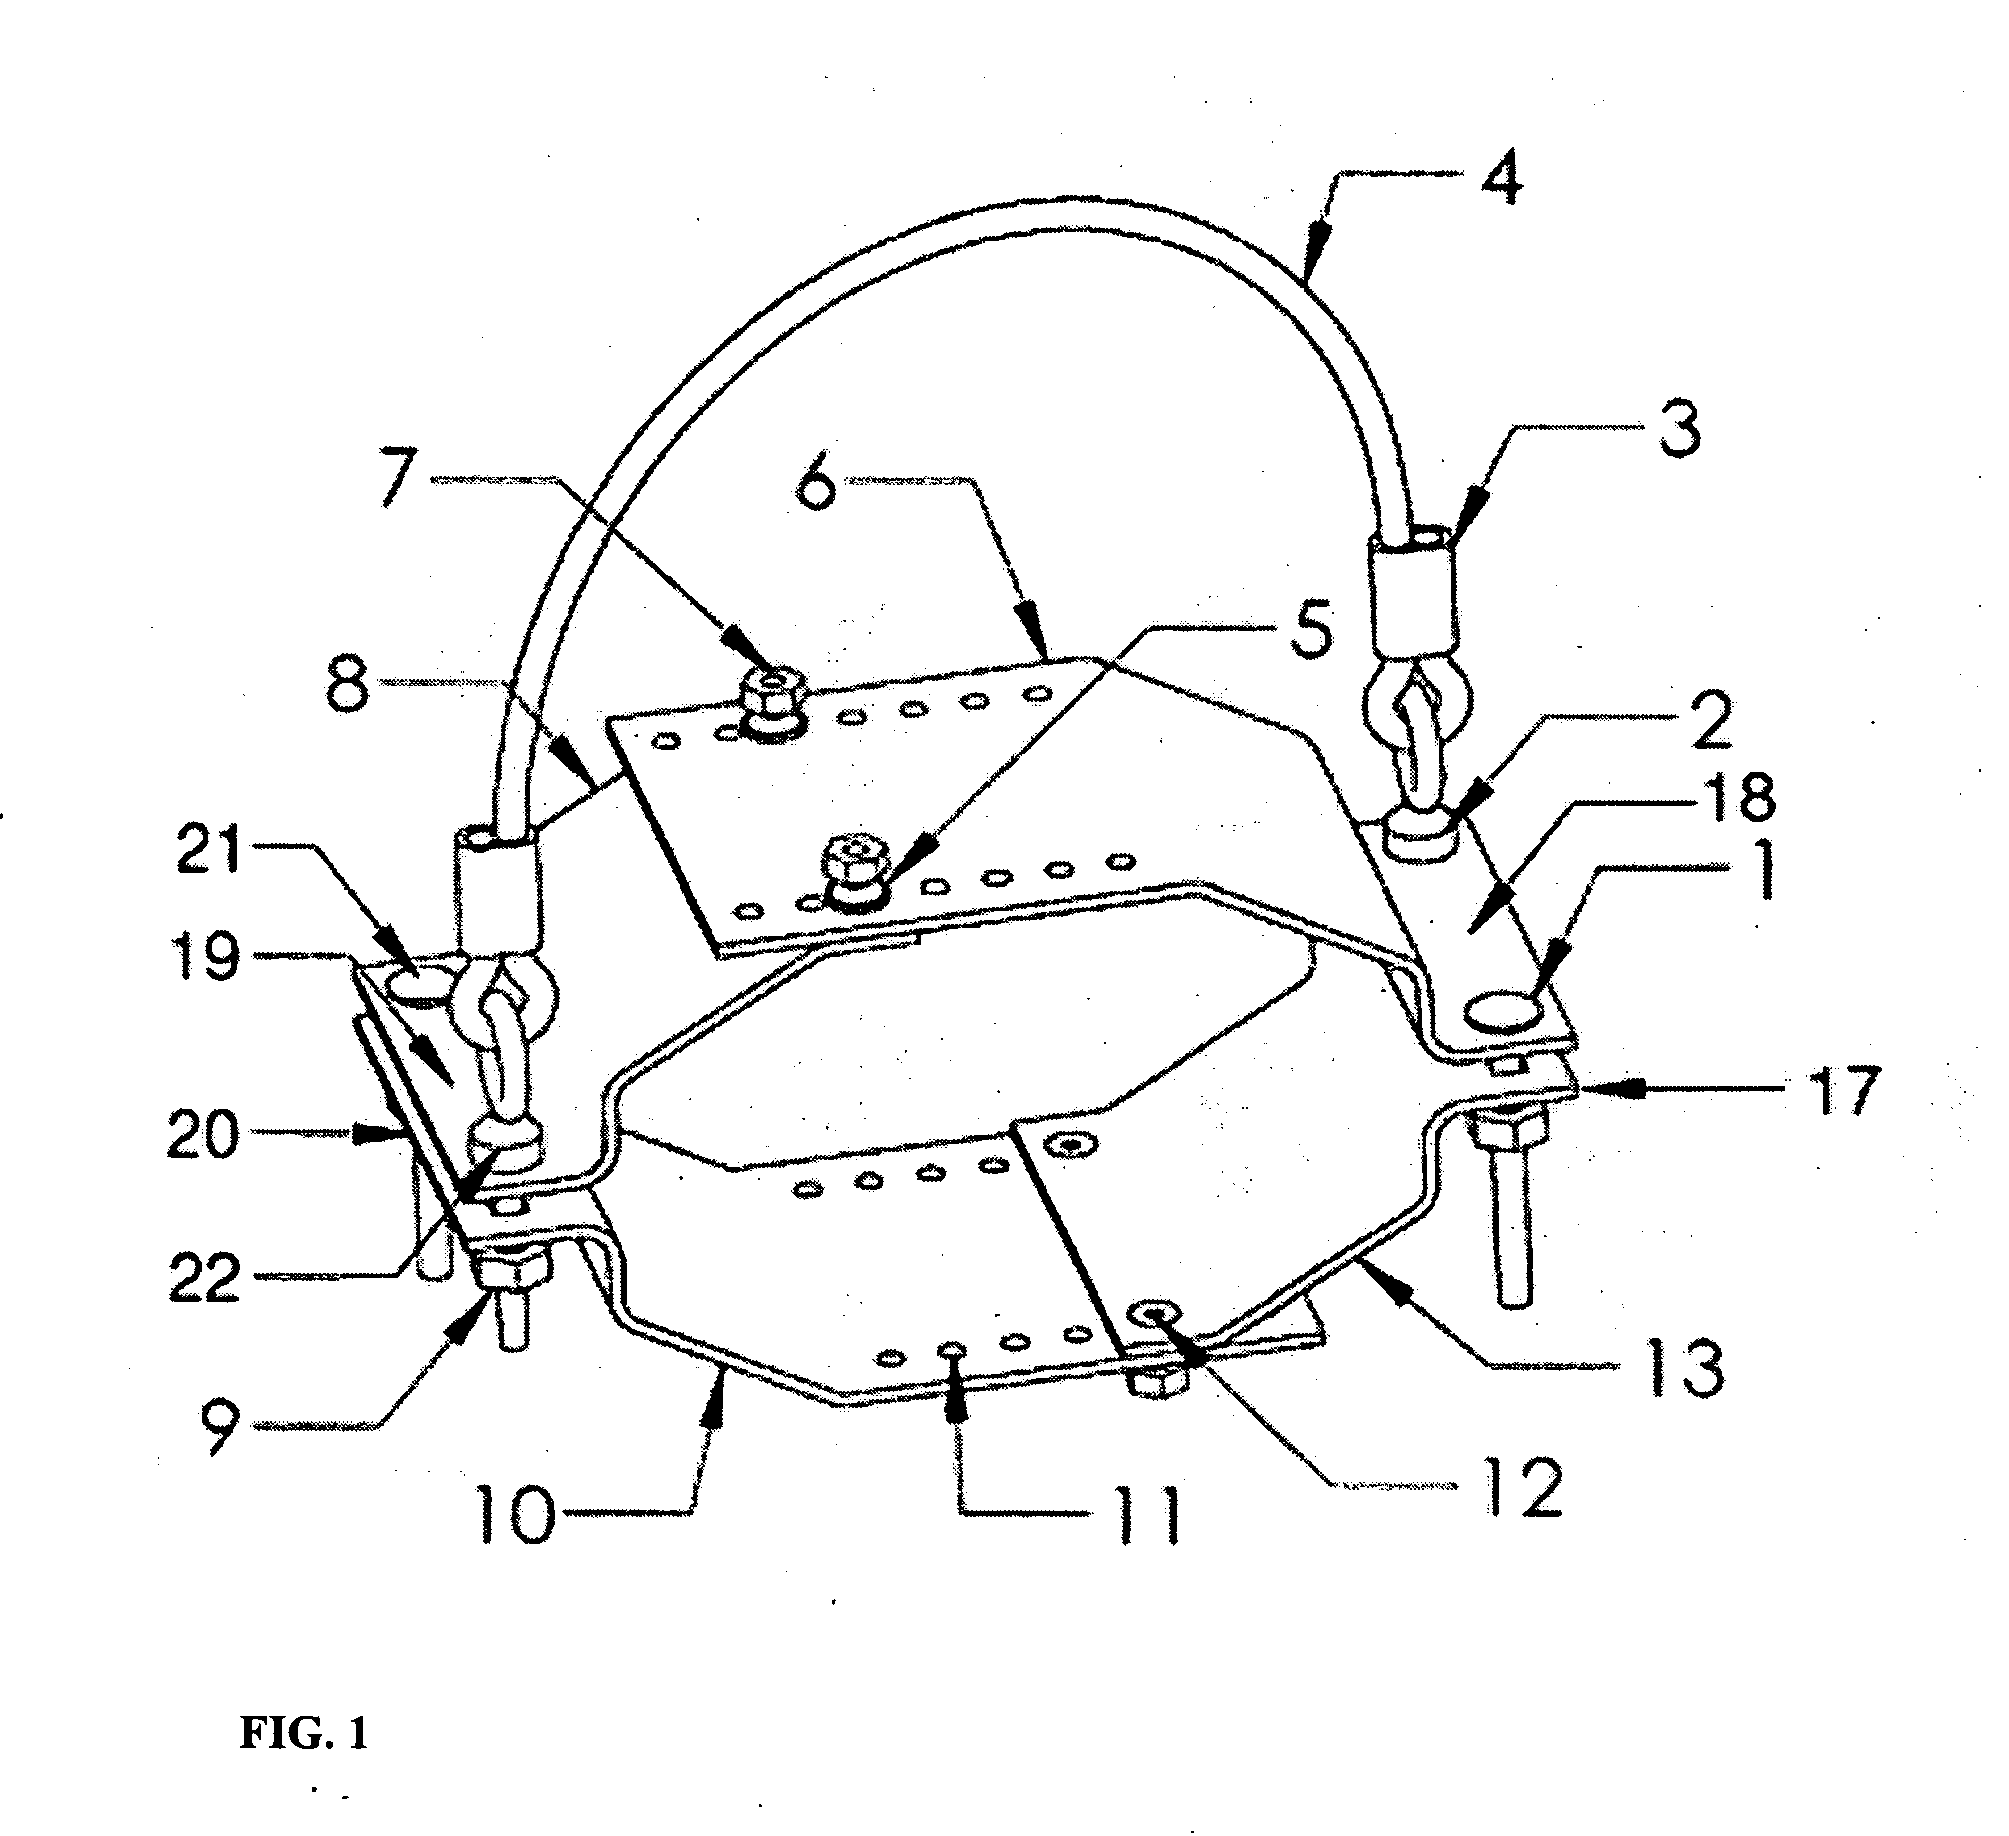 System and Method of Catalytic Converter Theft Deterrence